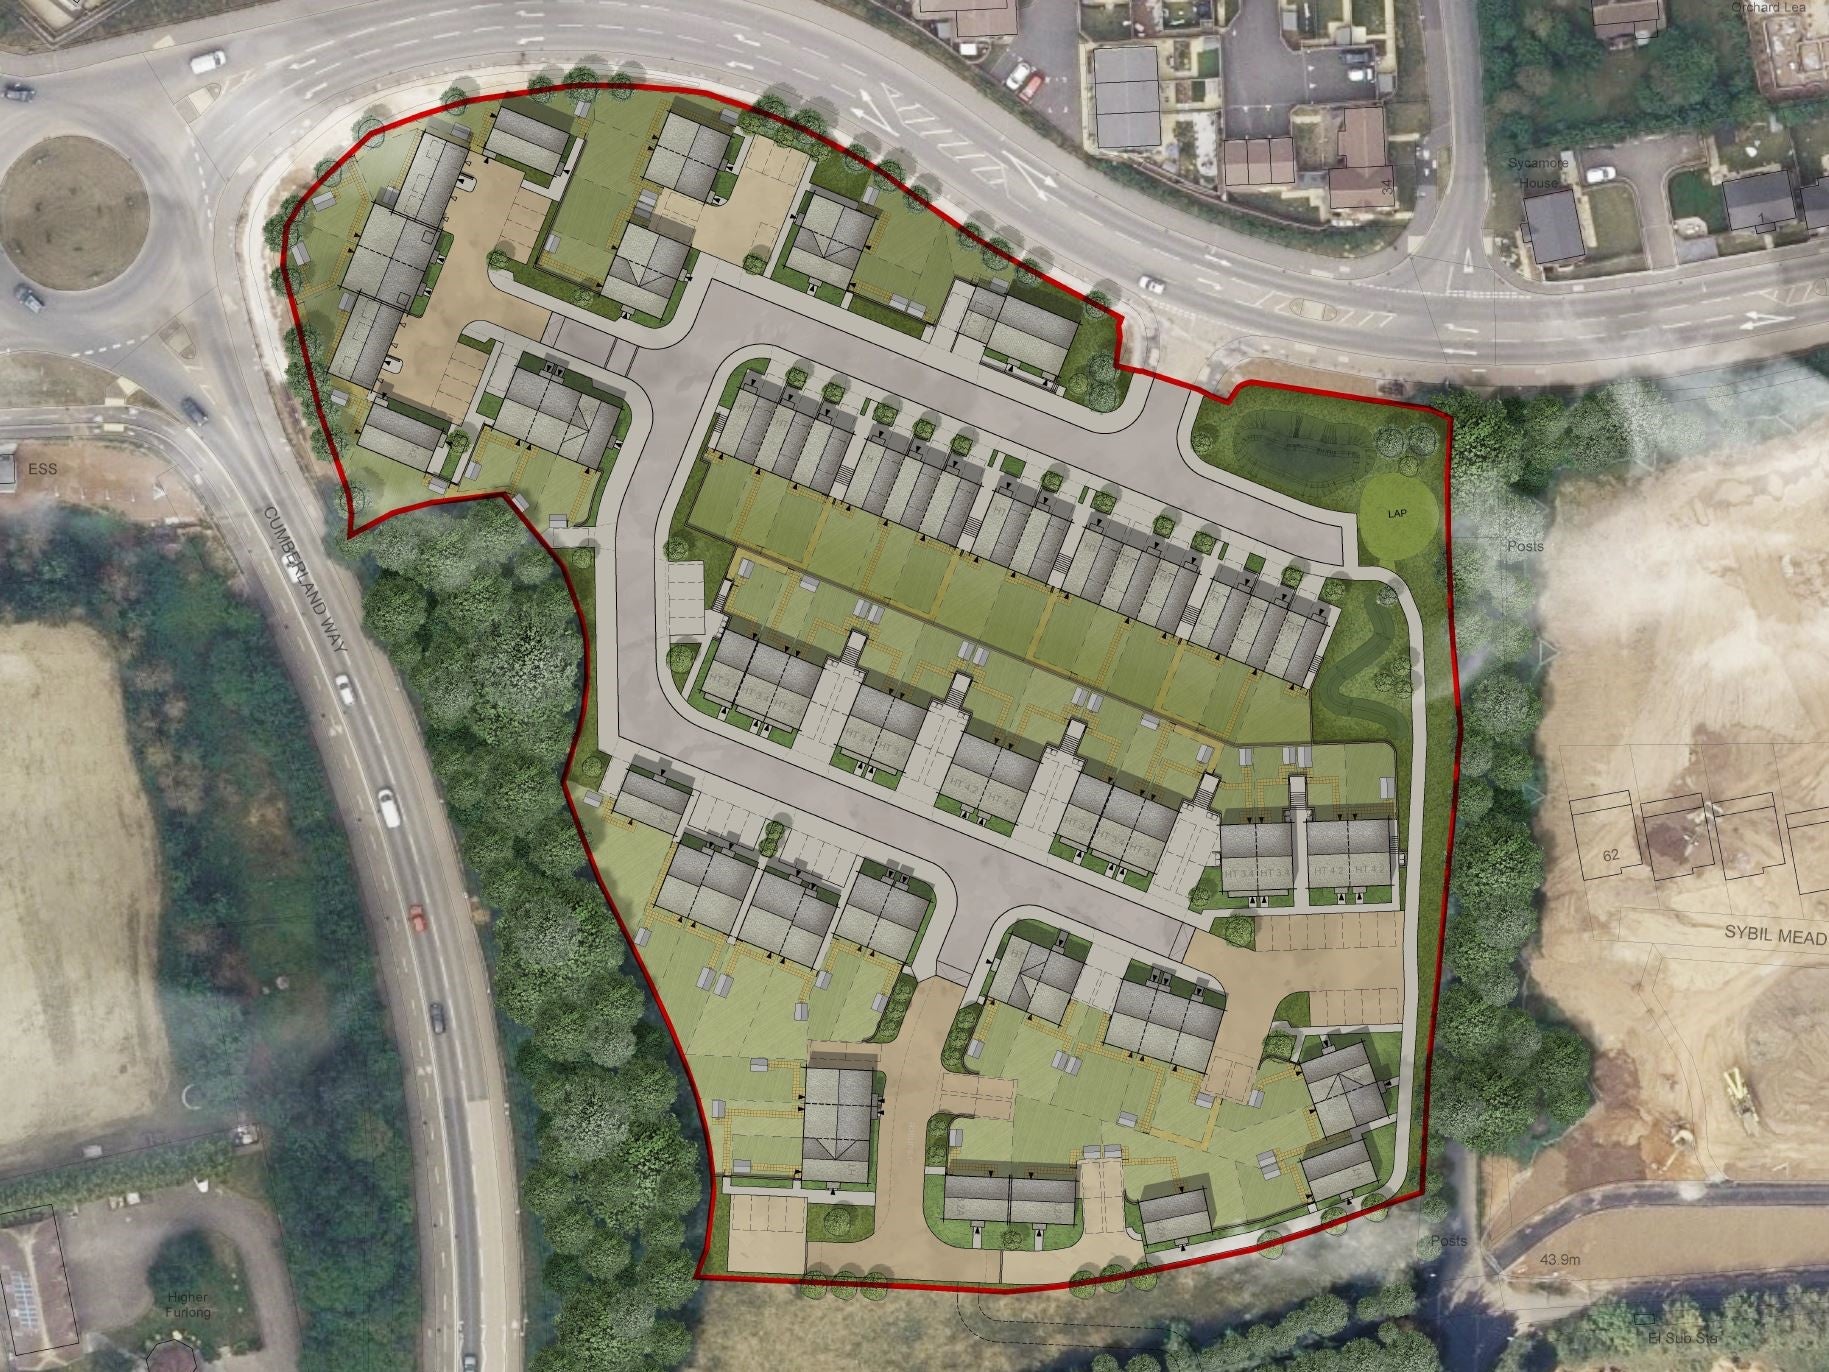 Proposed site plan of the Isca Hill Park development in Exeter